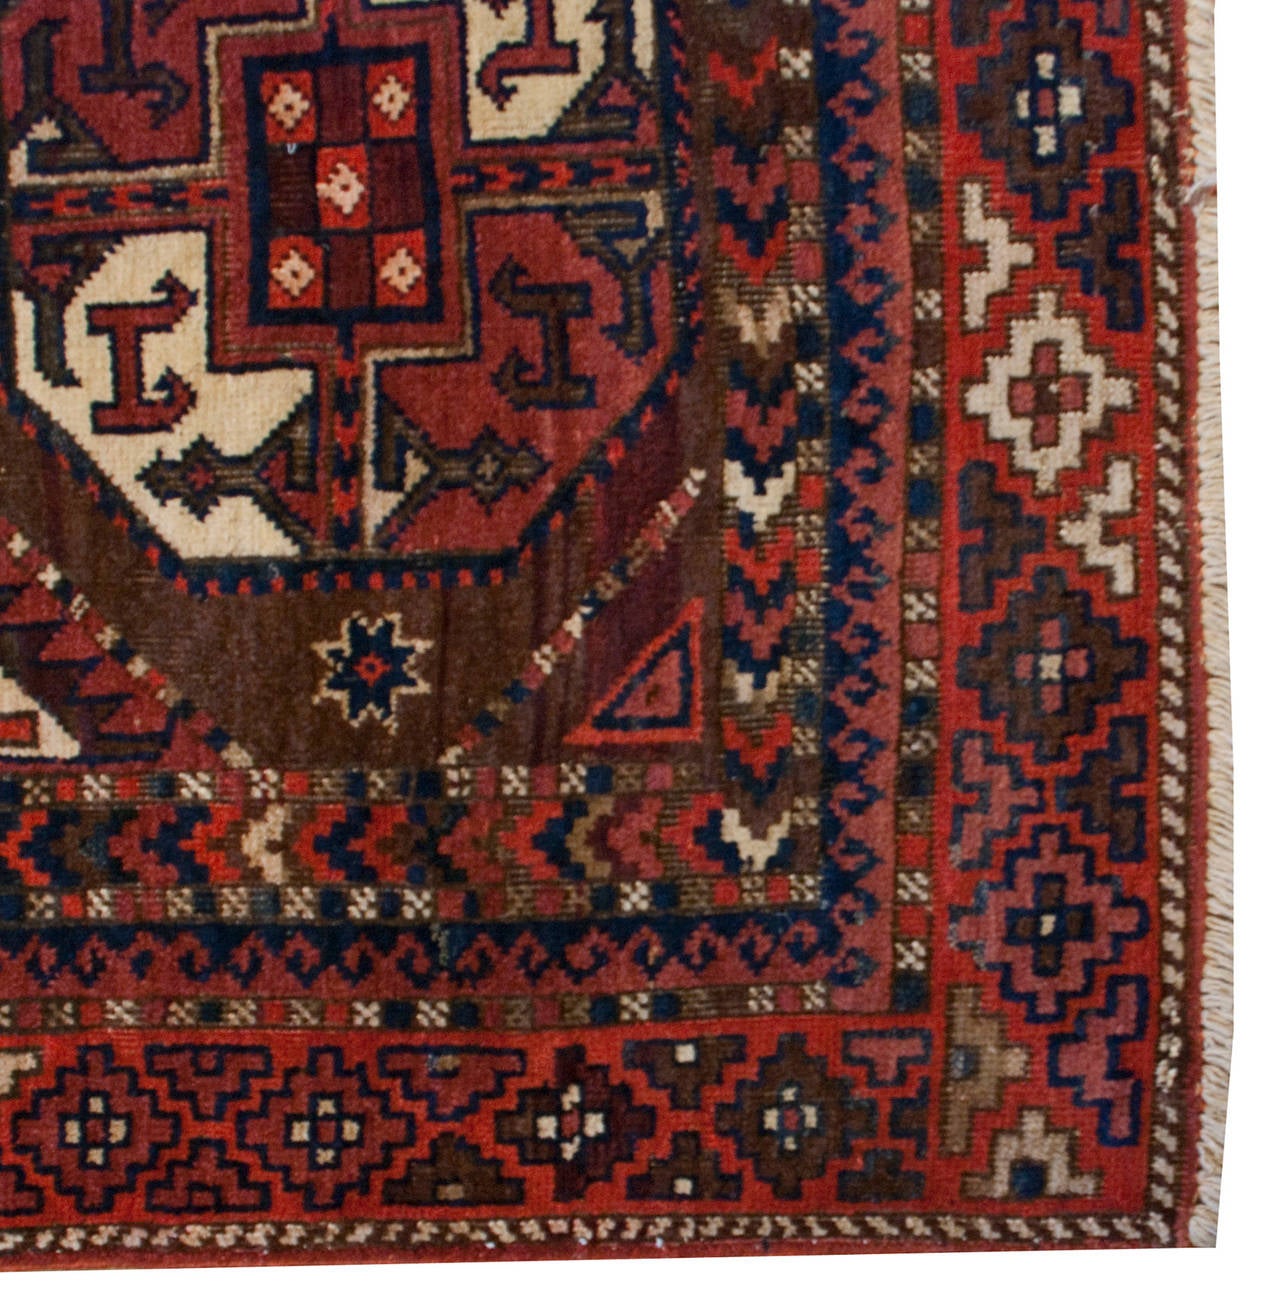 Early 20th Century Turkmen Rug In Excellent Condition For Sale In Chicago, IL